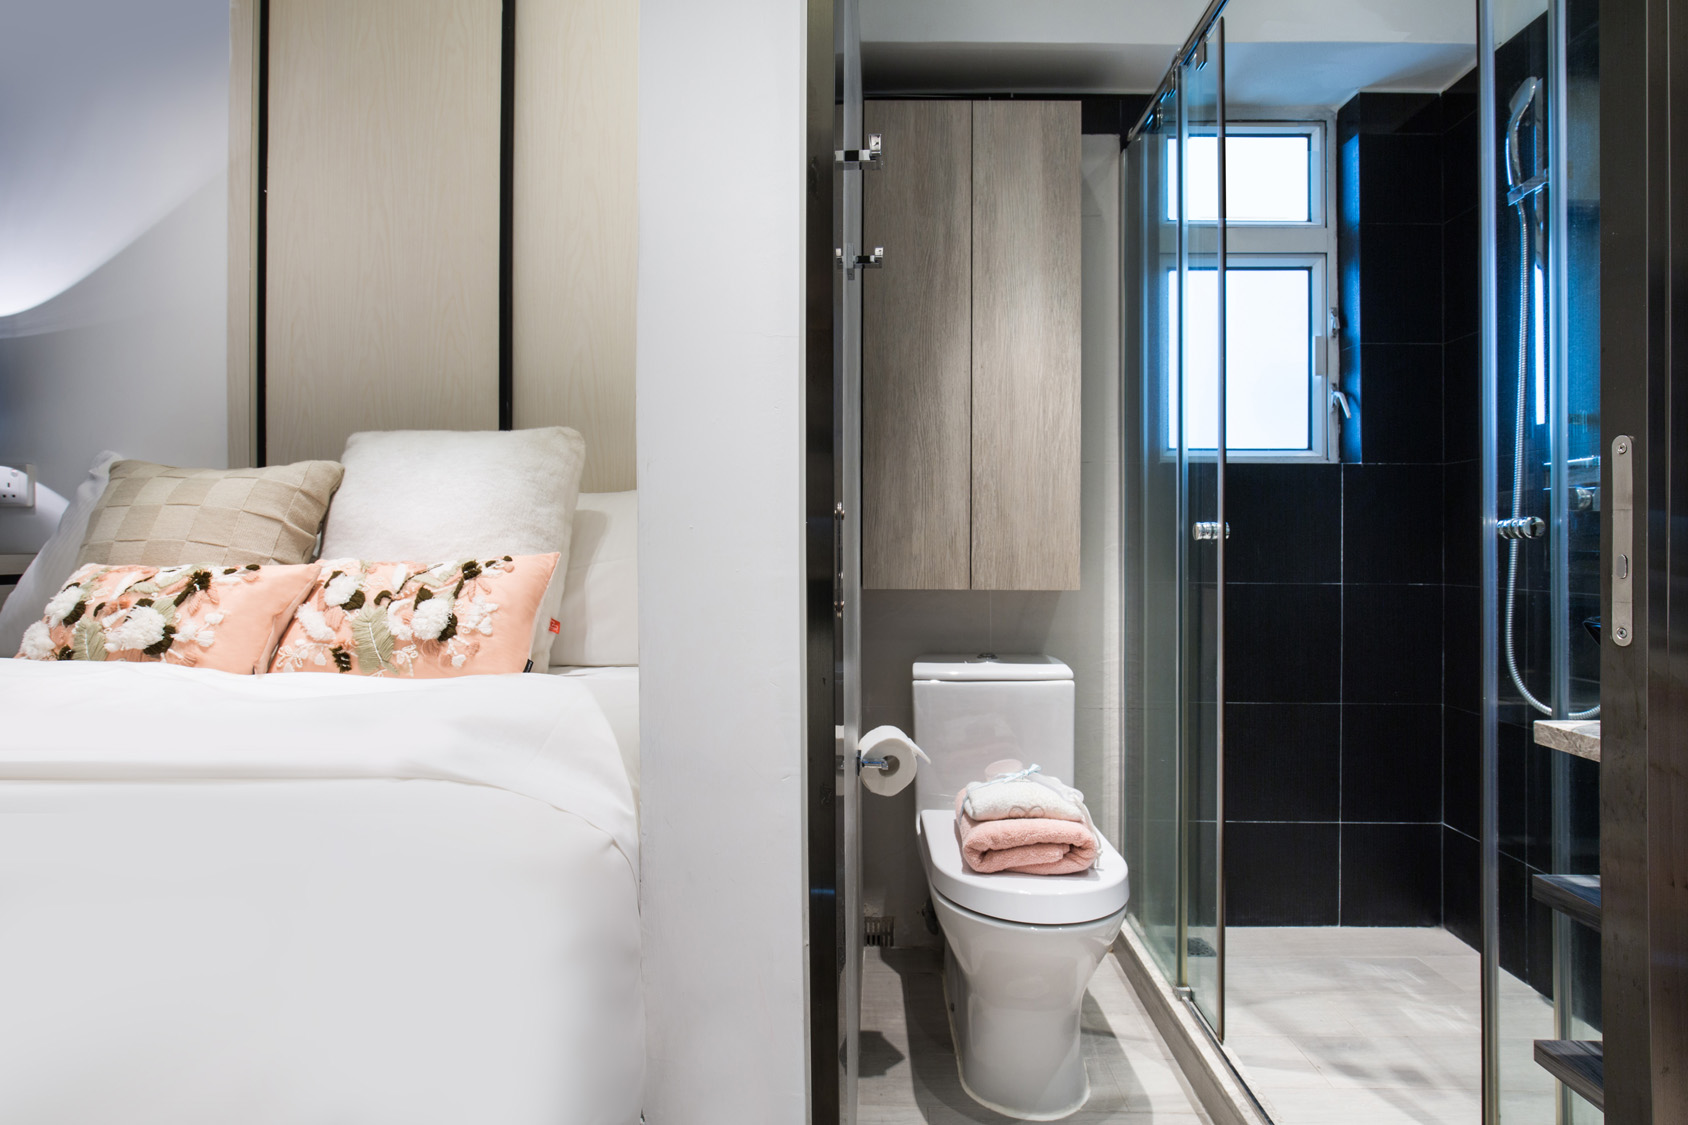 Studio bathroom at The Lodge serviced apartment in West Kowloon